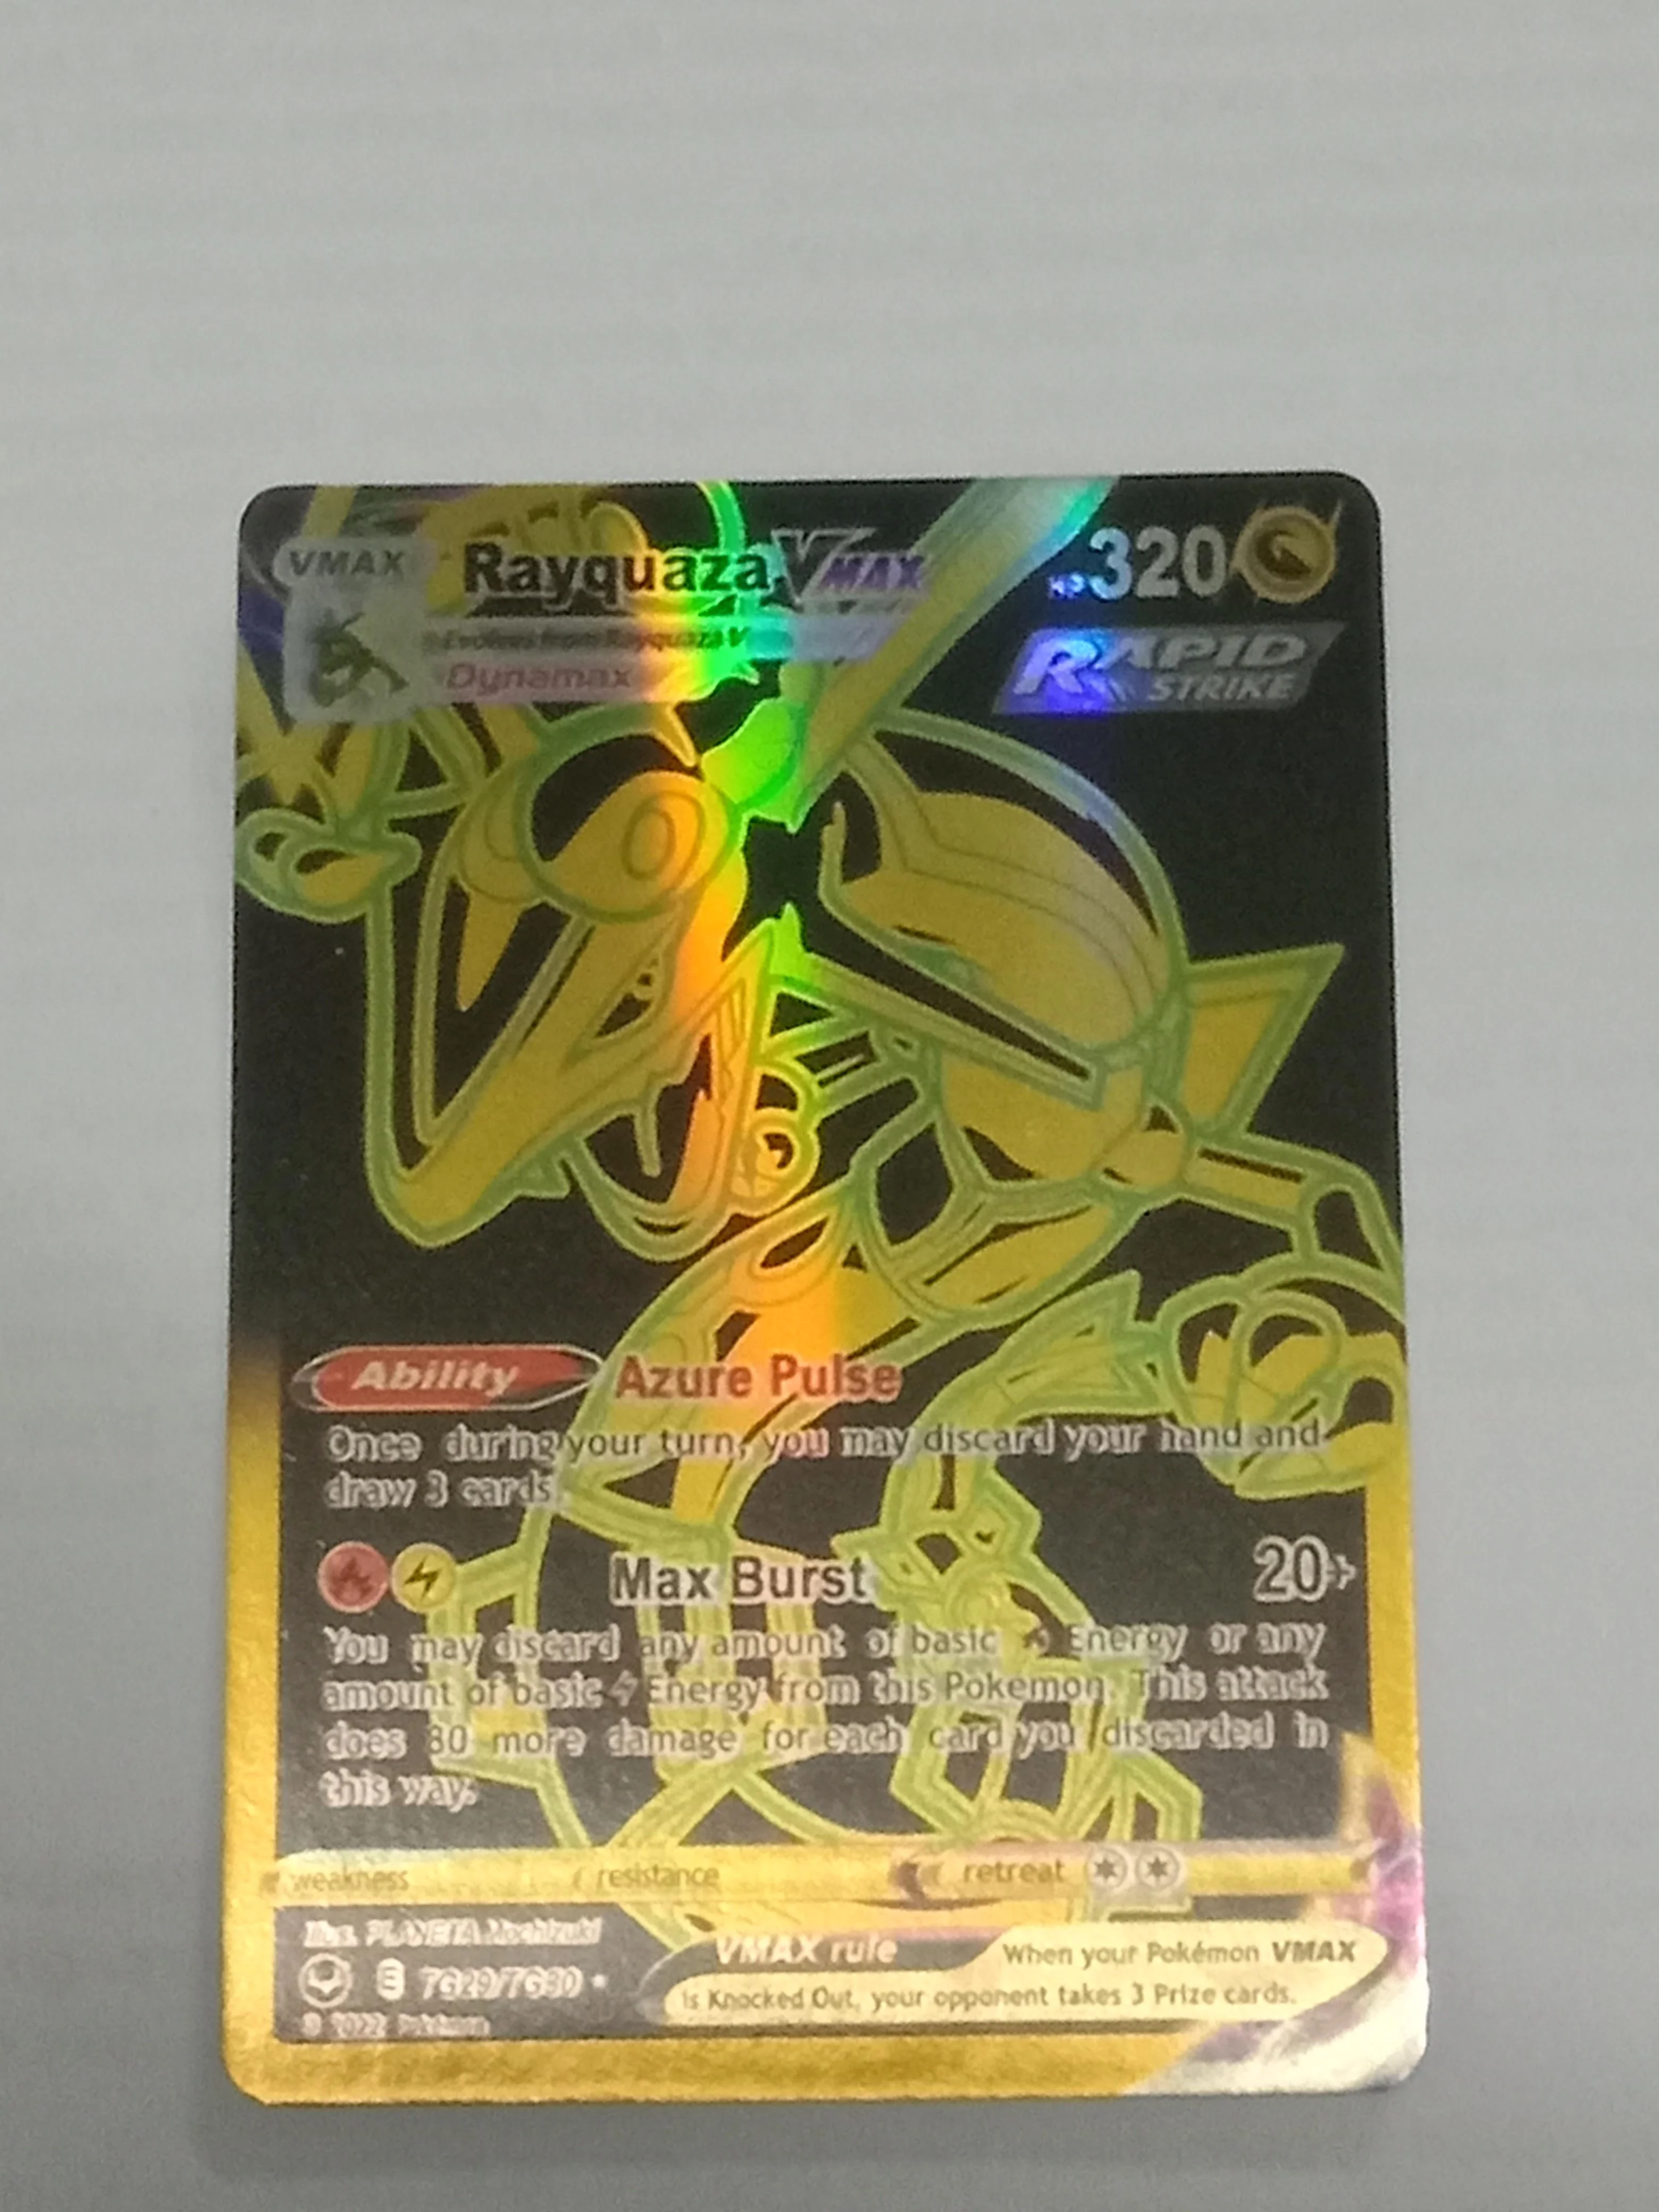 An example of a fake Rayquaza card